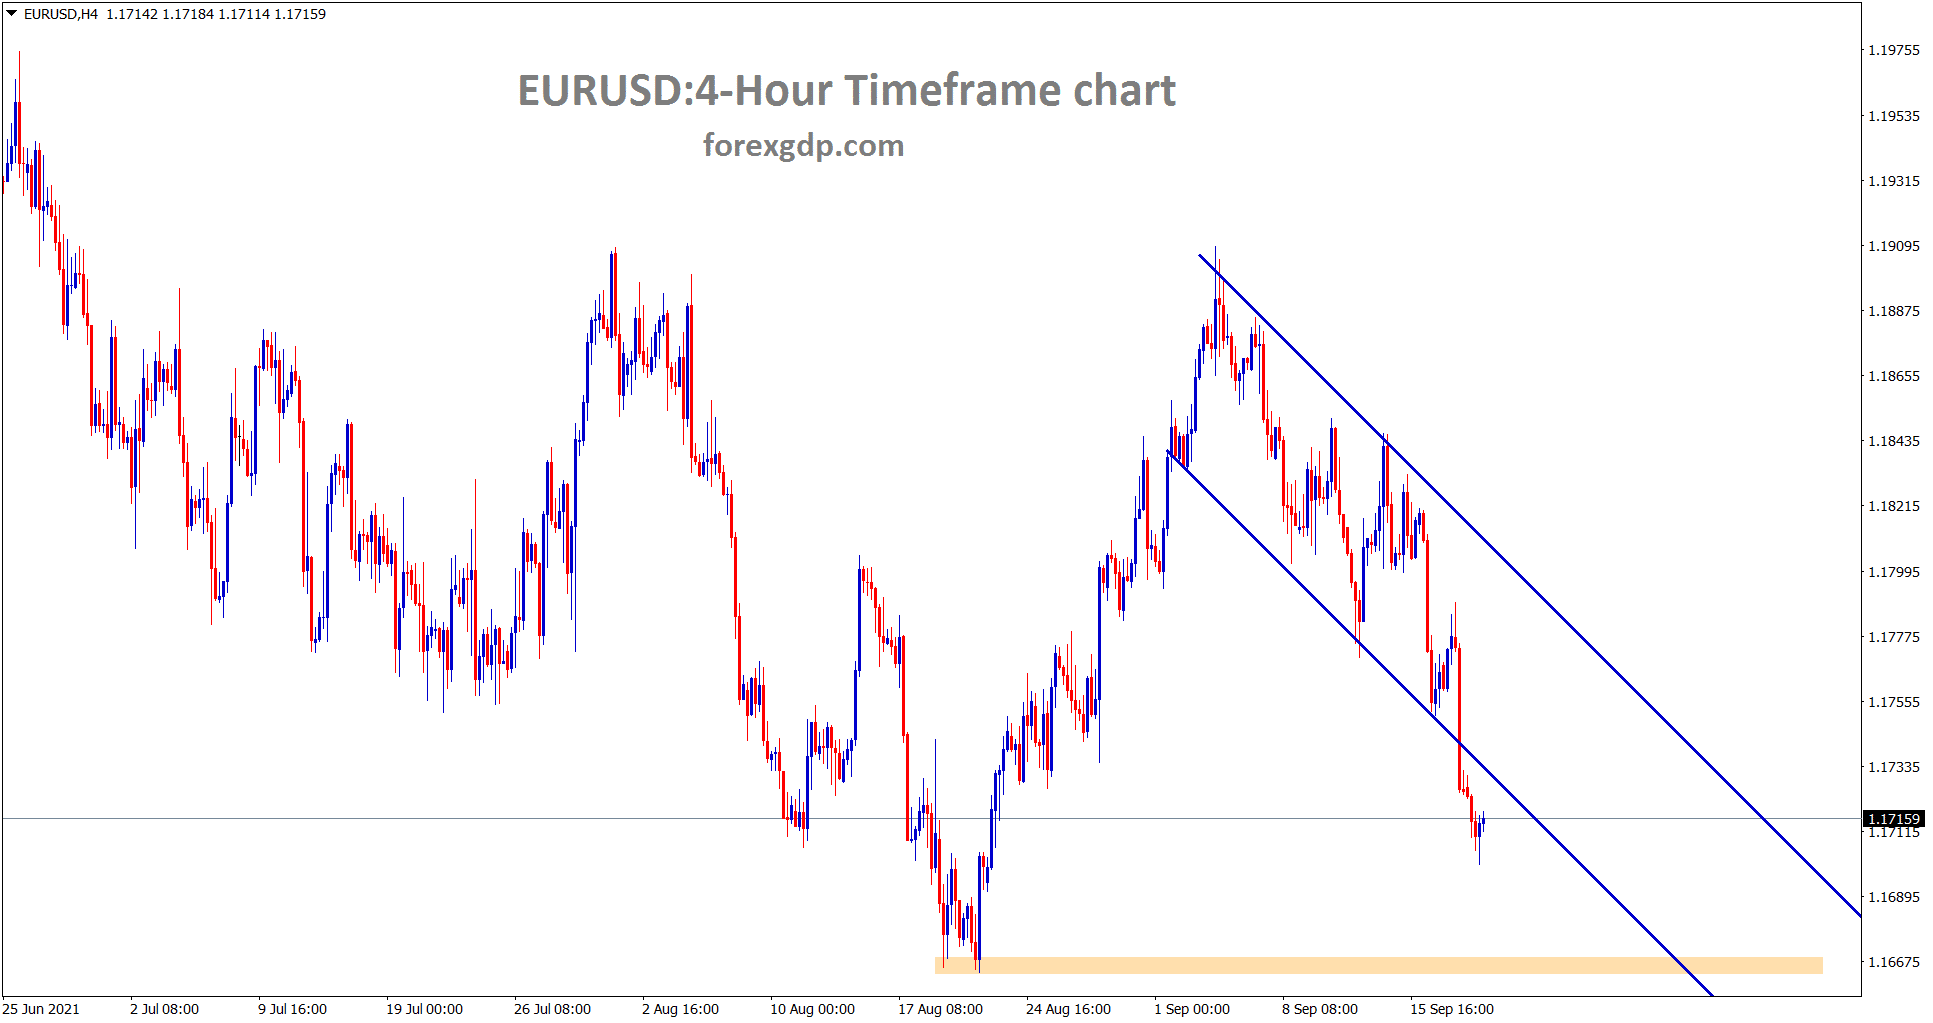 EURUSD has broken the bottom level of the descending channel and starts to fall towards the next support area